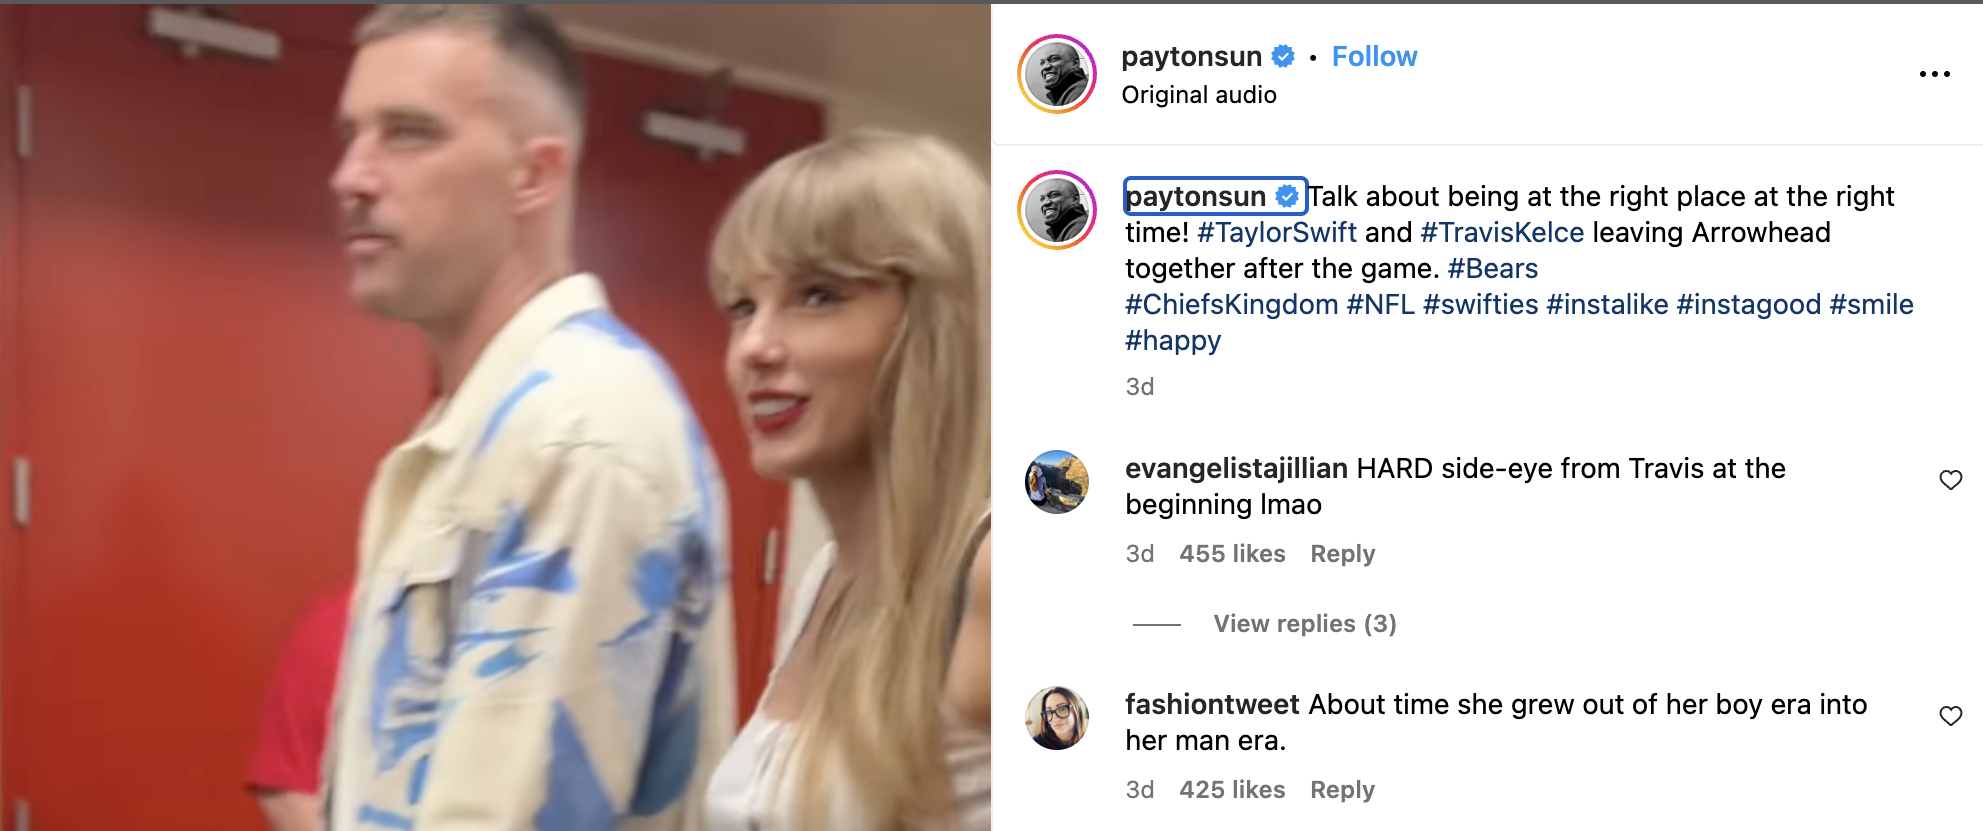 akil khatri recommends taylor swift dressing room pic